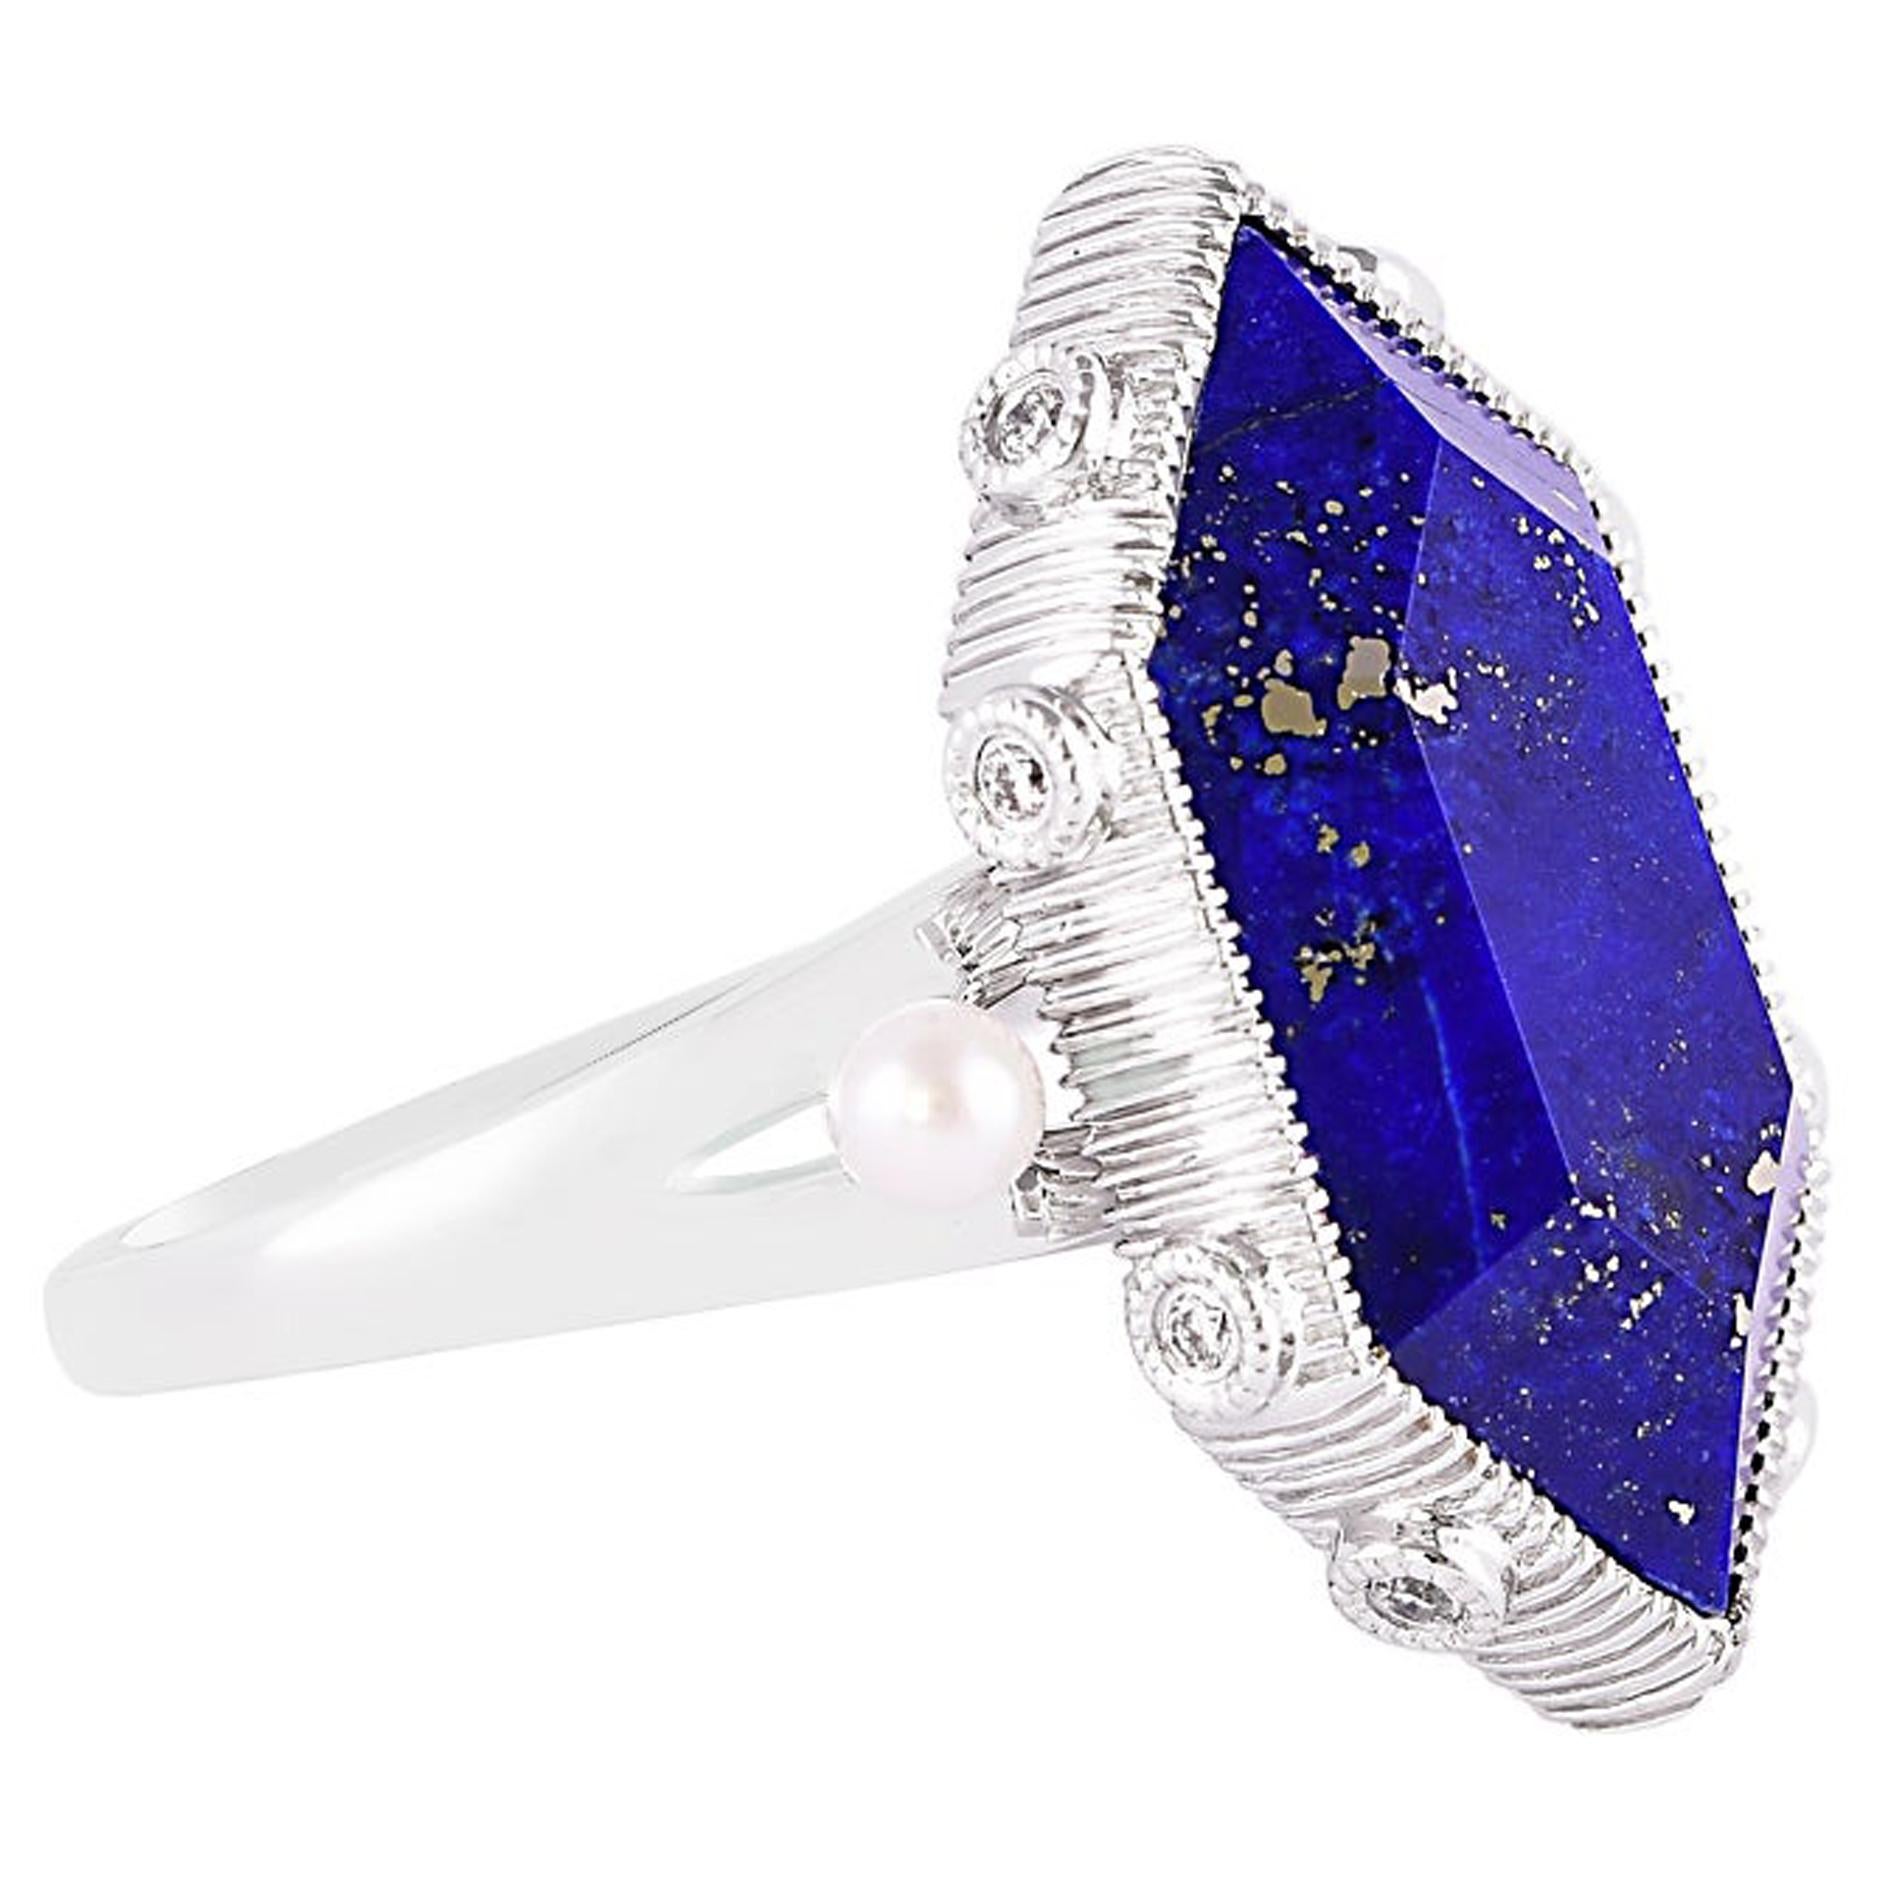 8.82 Carat Lapis Lazuli Ring in 18 Karat White Gold with Diamonds and Pearls For Sale